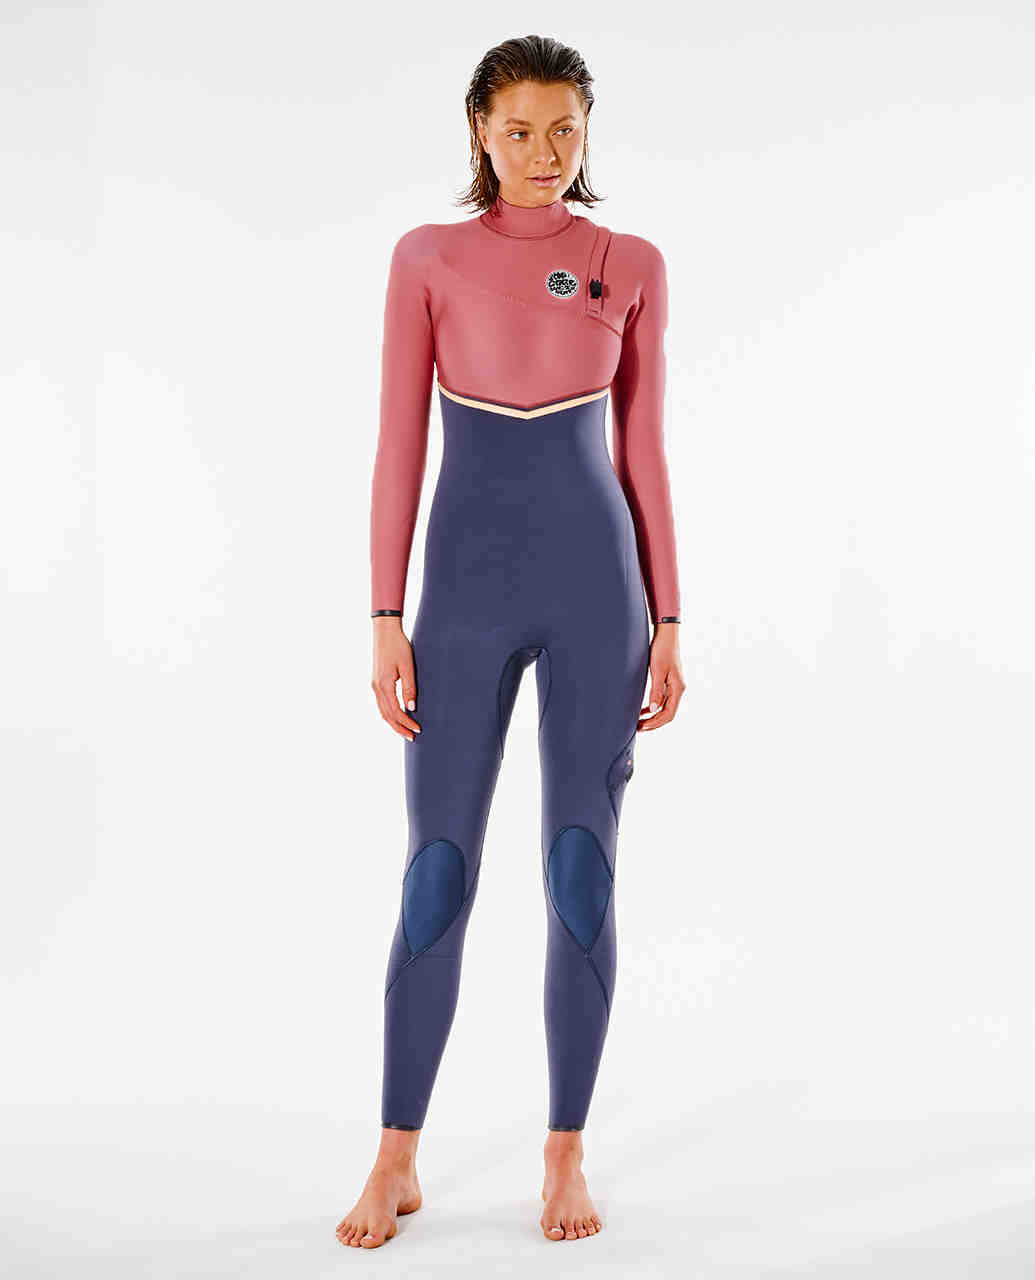 How tight should a wetsuit be on shoulders?